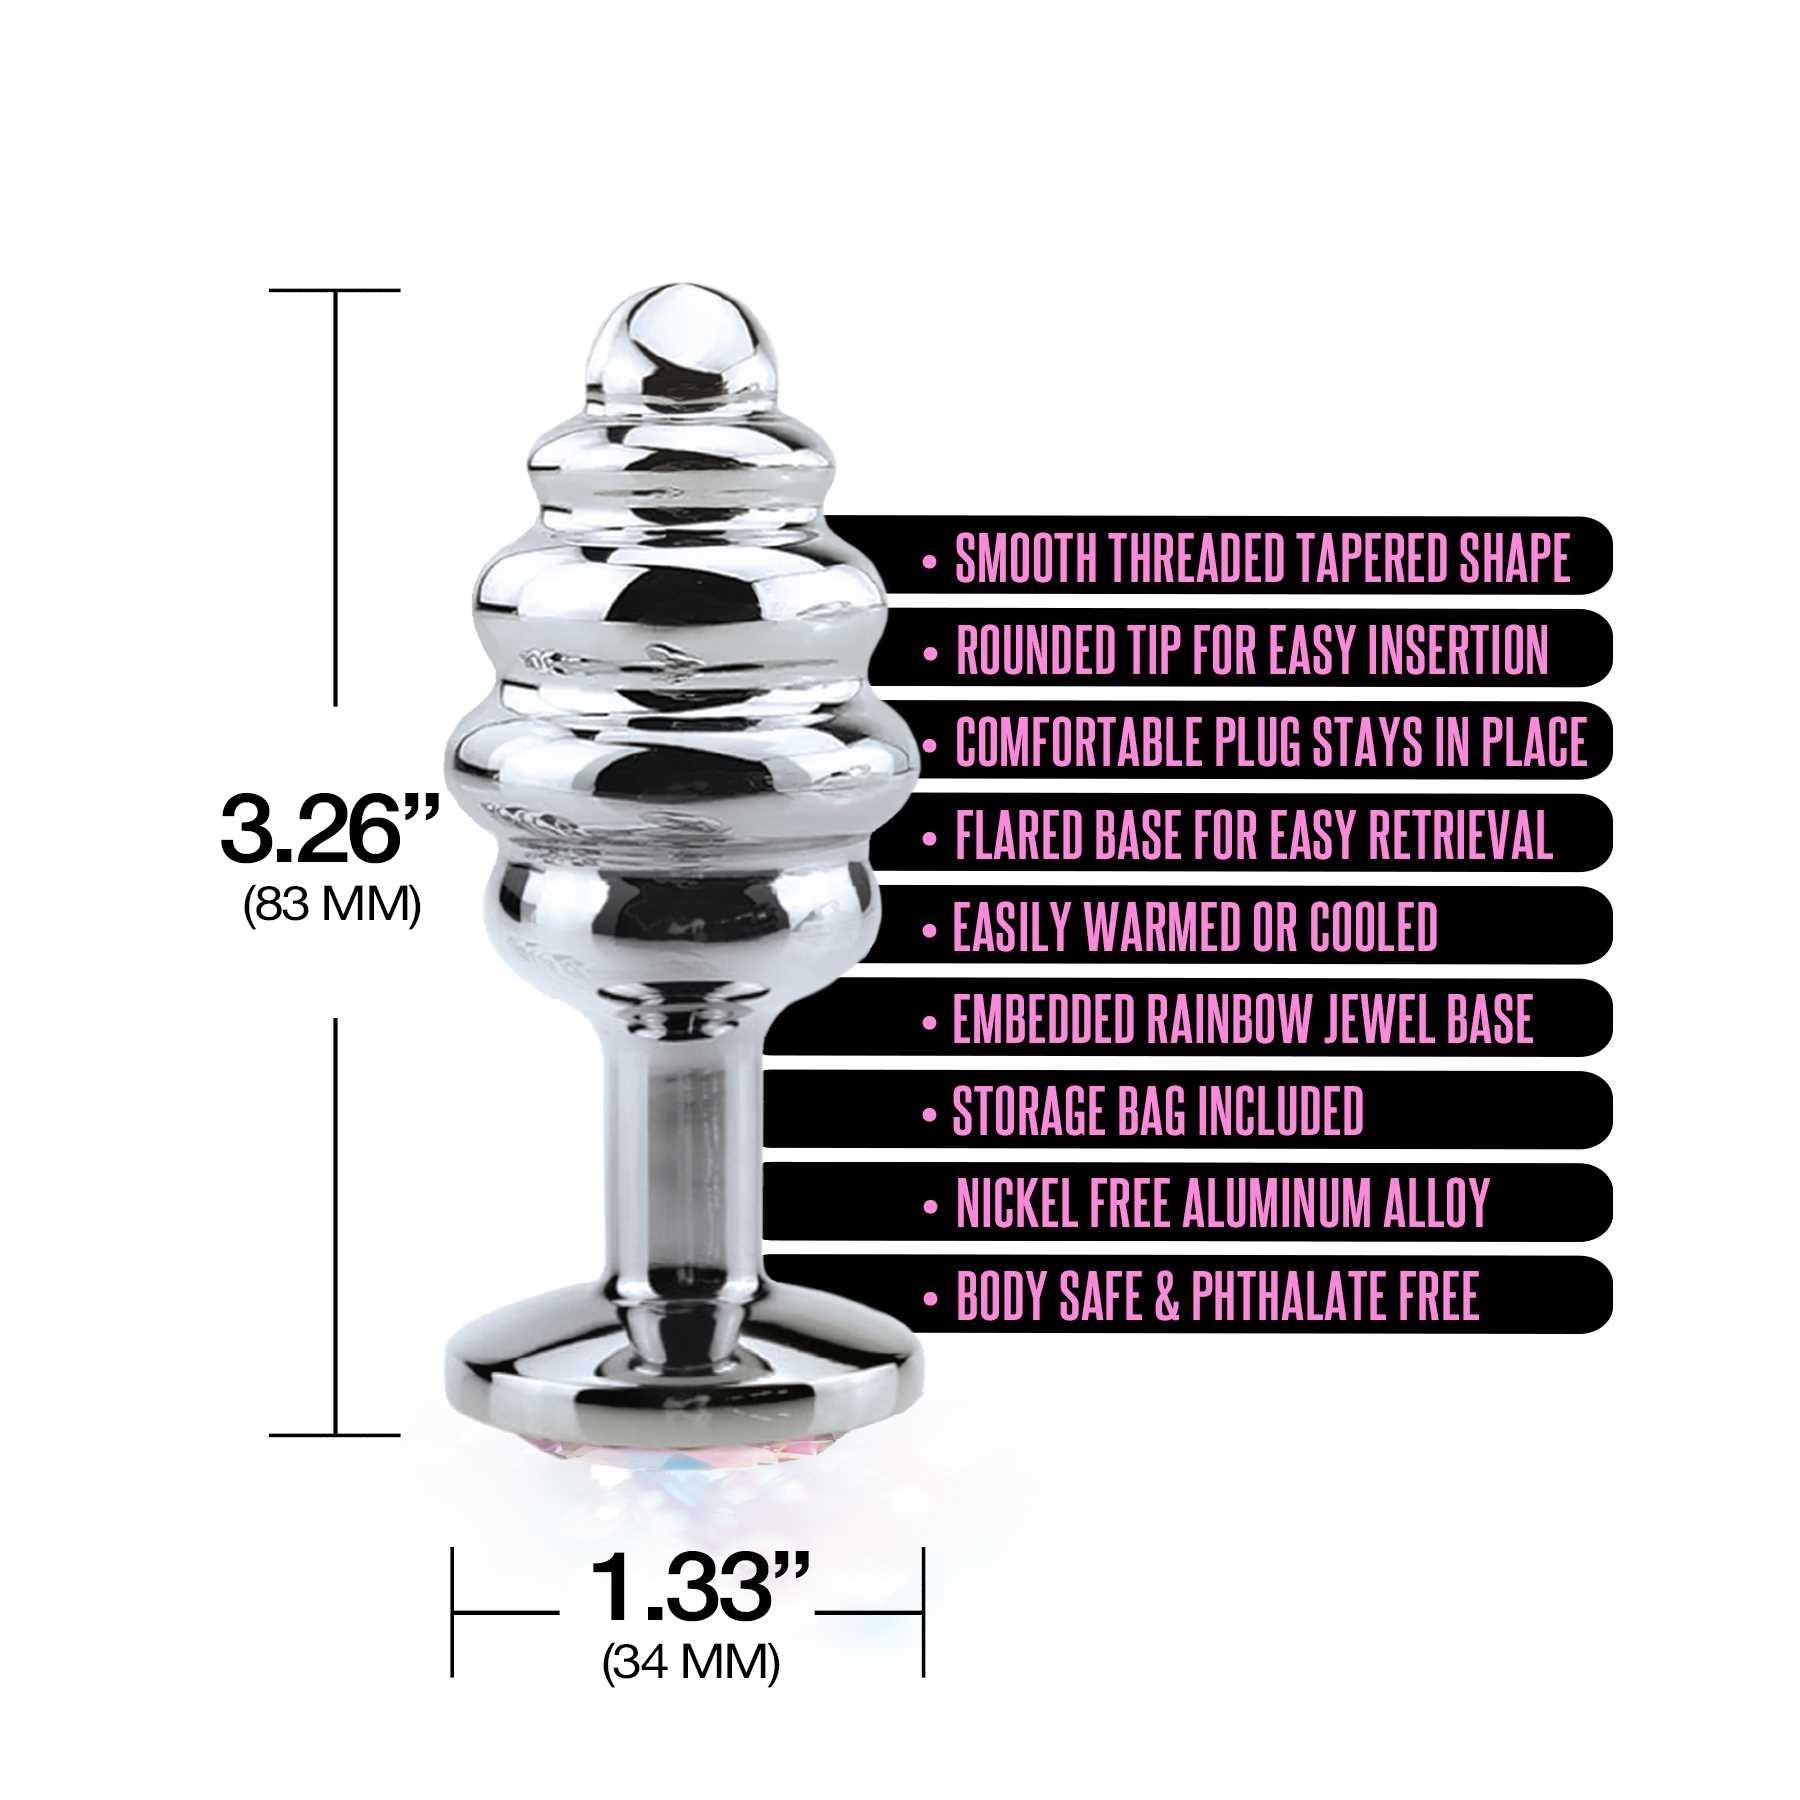 NIXIE HONEY DIPPER METAL BUTT PLUG specifications